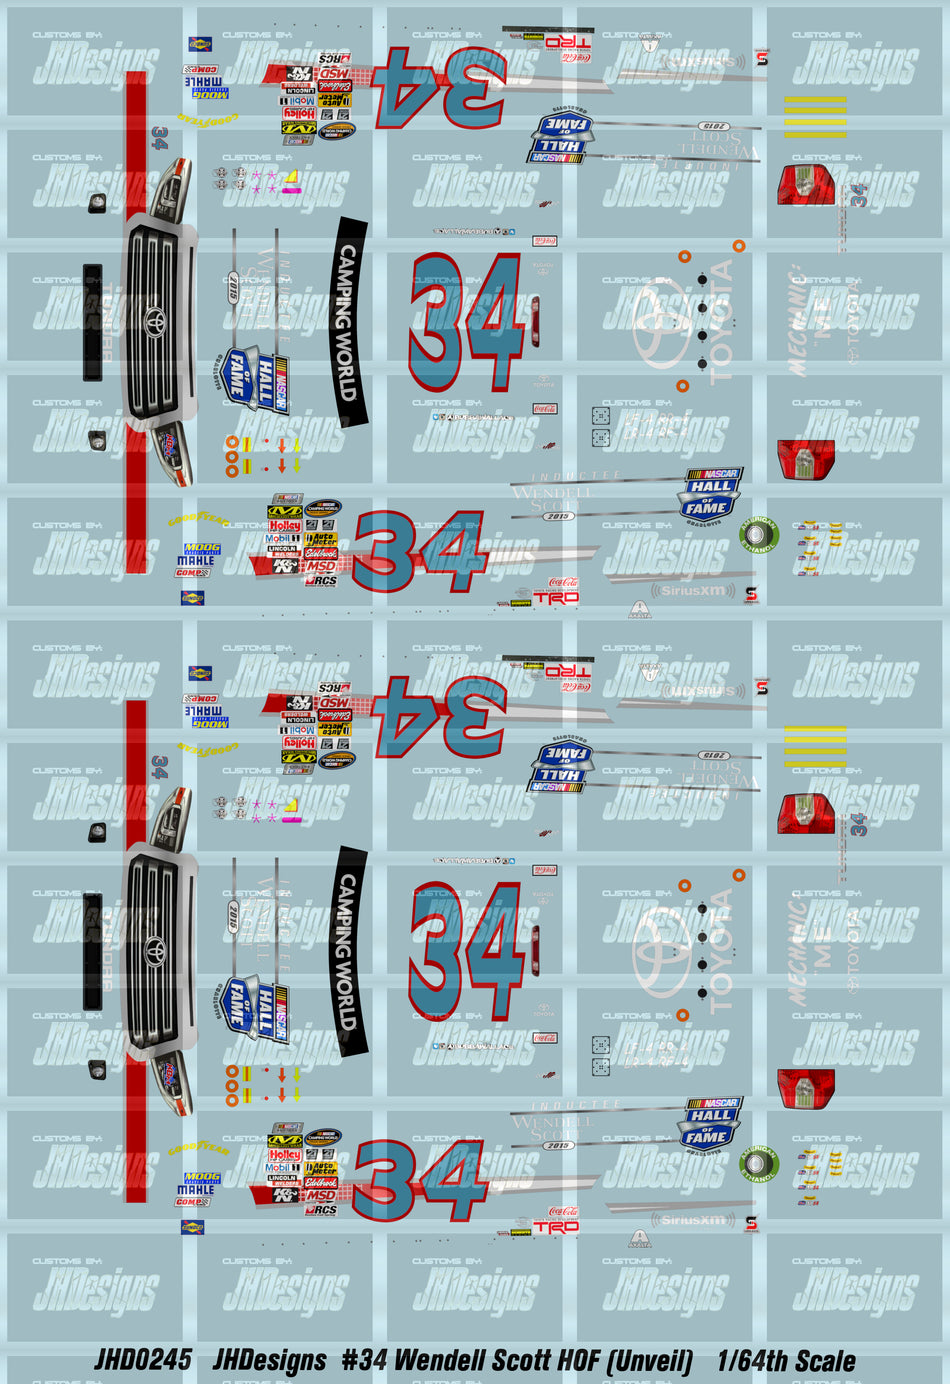 JH Designs Bubba Wallace 2014 CWTS #34 Wendell Scott Hall of Fame (Unveil) 1:64 Racecar Decal Set